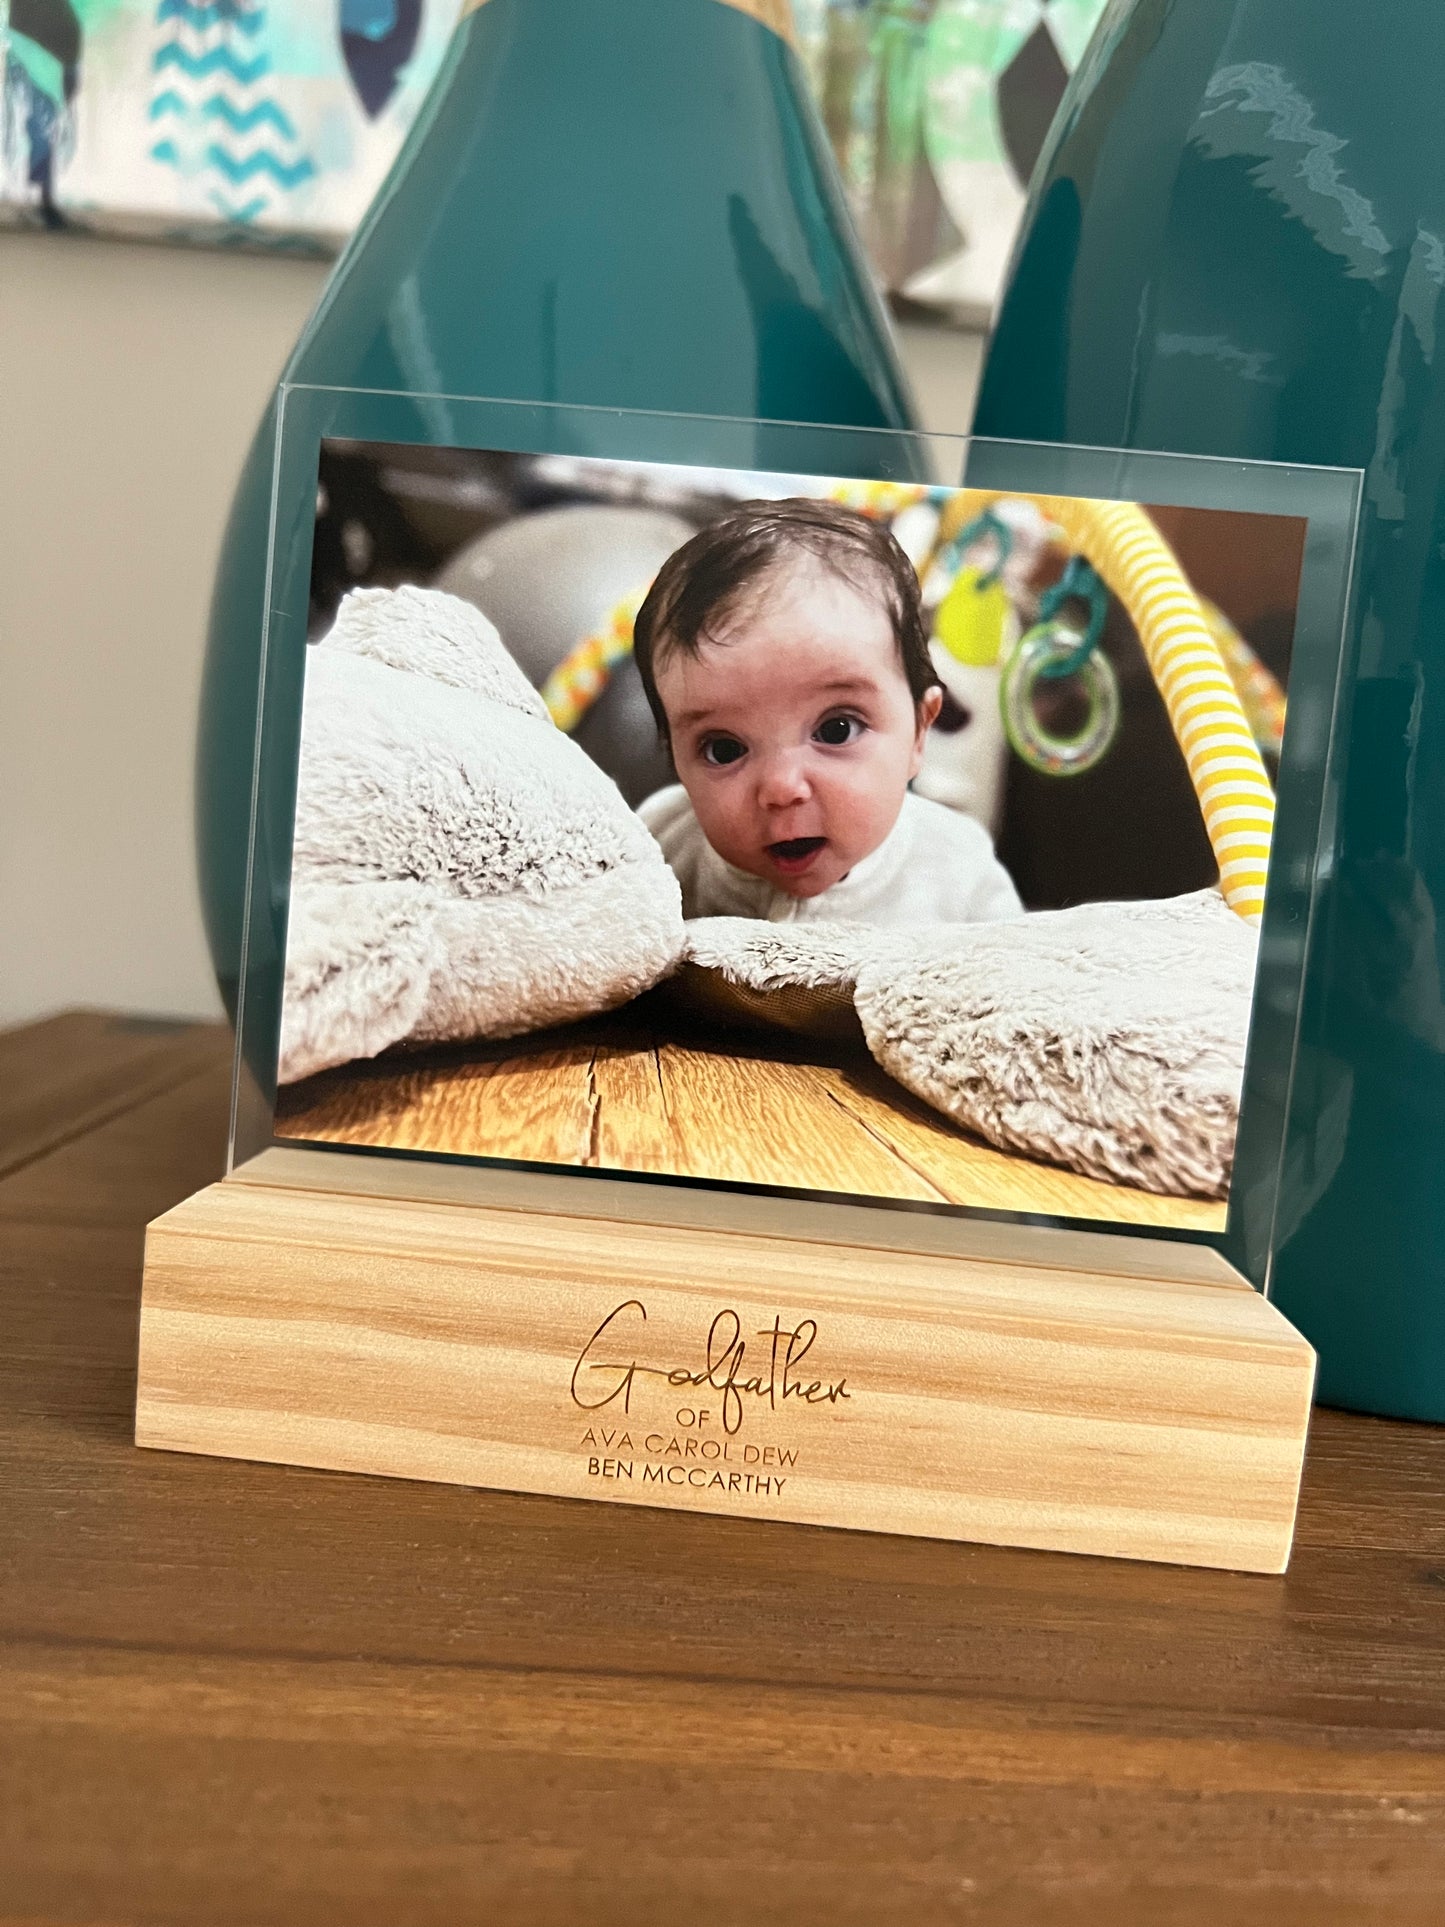 Single Acrylic Photo Print with Wooden Stand